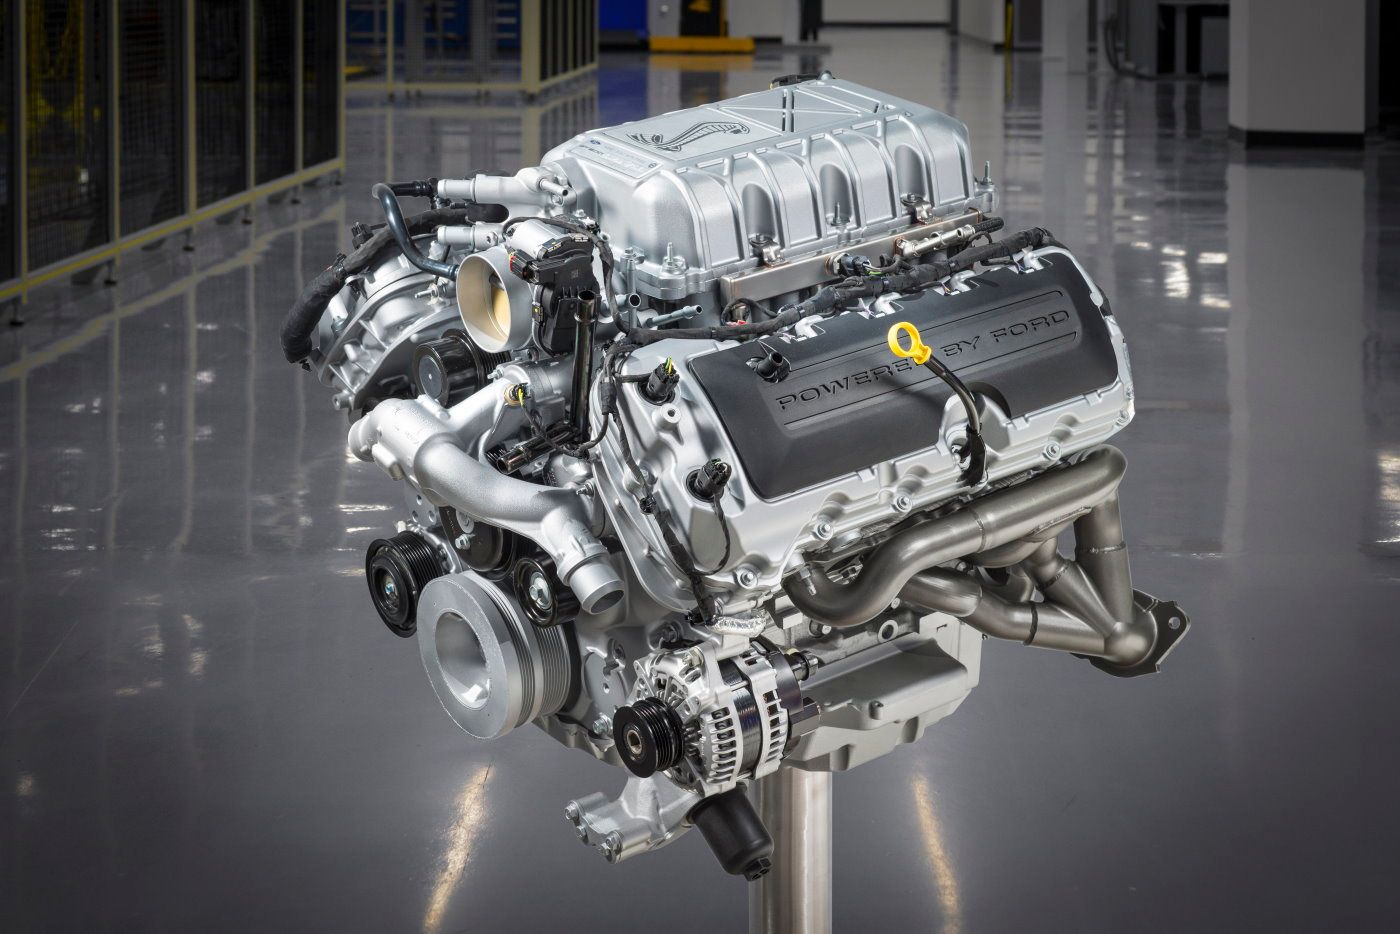 The 2020 Shelby GT500 760-horsepower 5.2-liter V8 engine is the most power- and torque-dense supercharged V8 in the world.